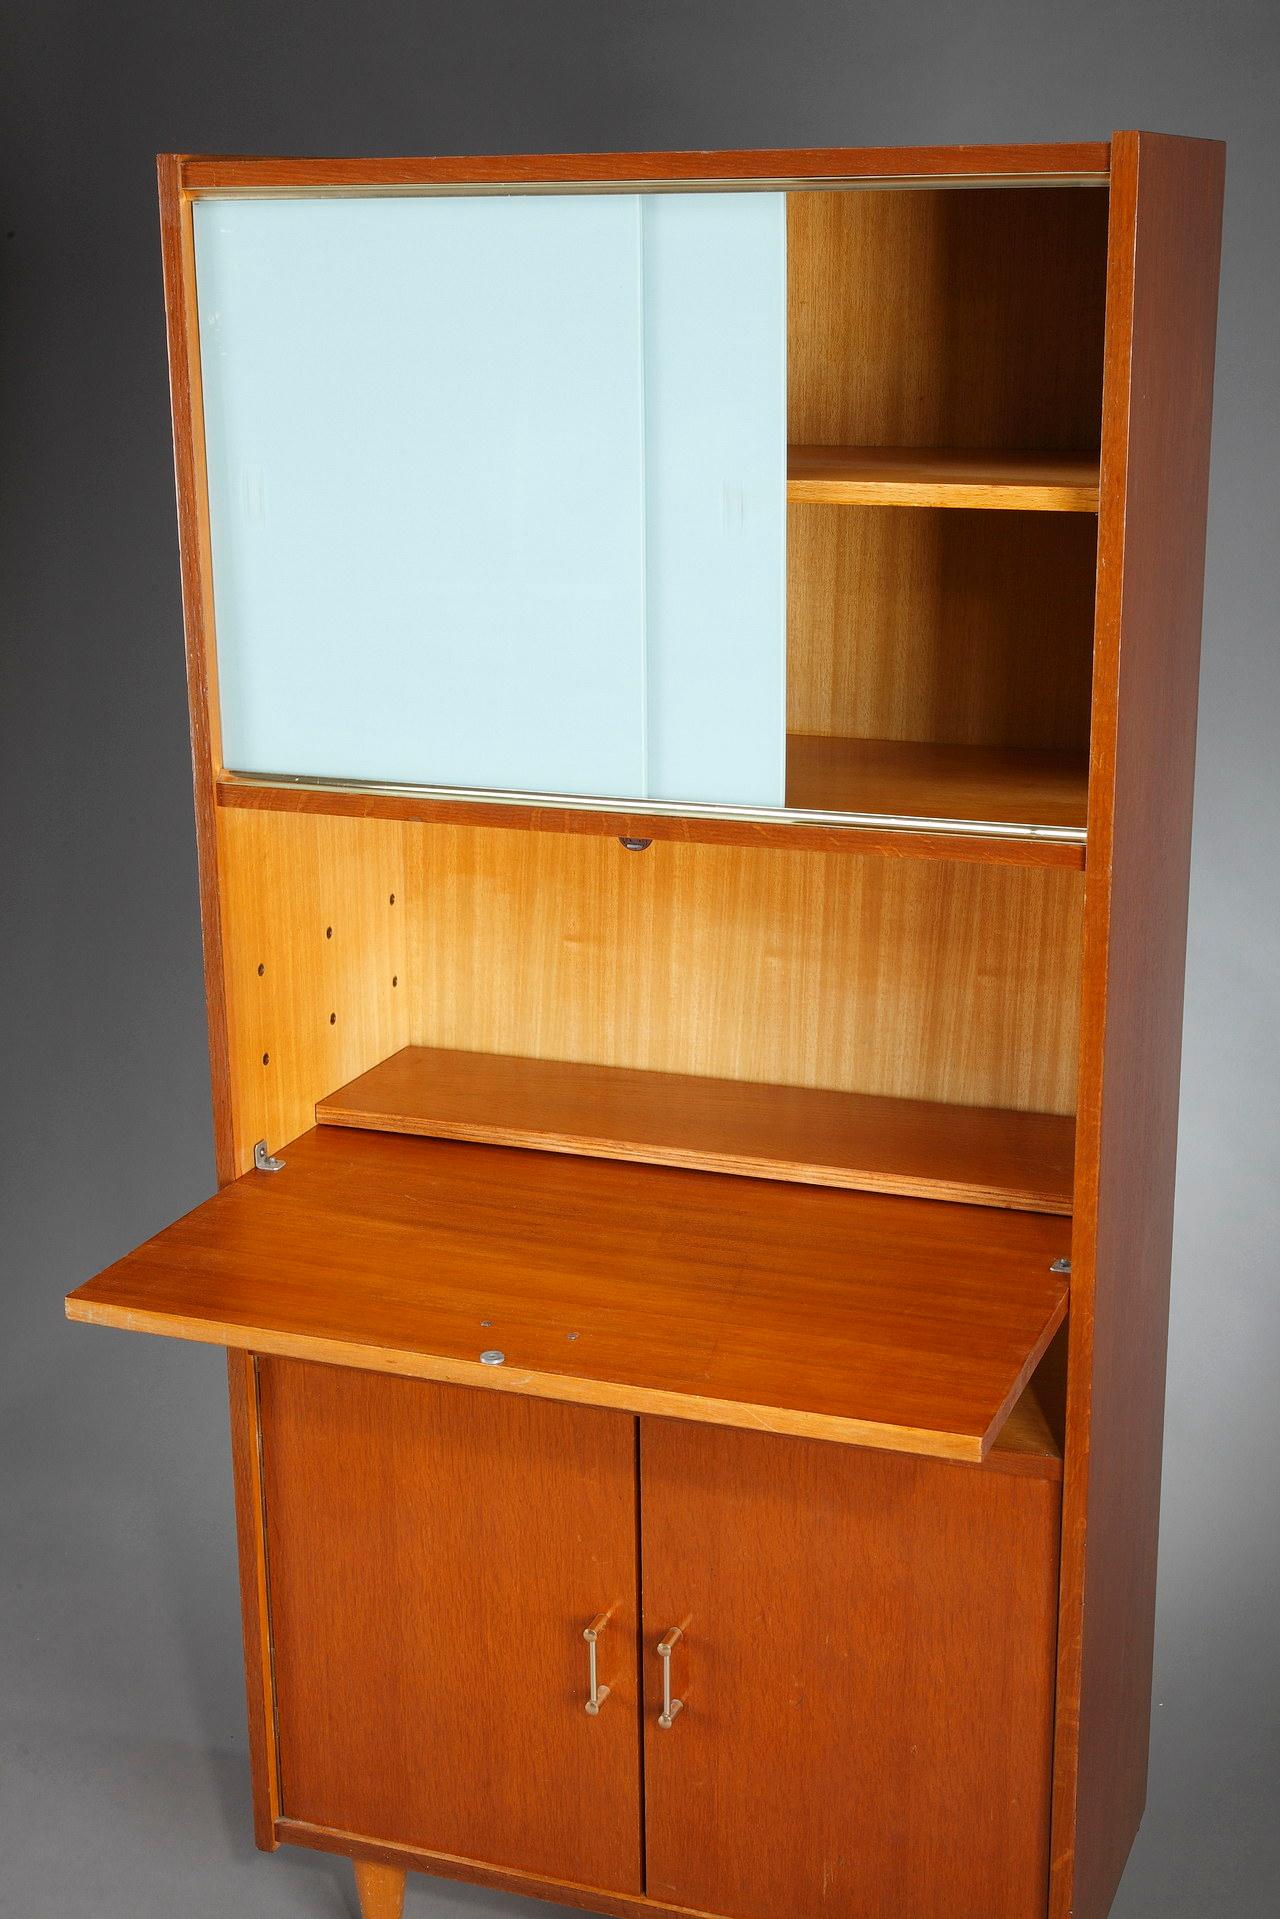 Mid-20th Century Mid-Century Modern Desk from the 1960s For Sale